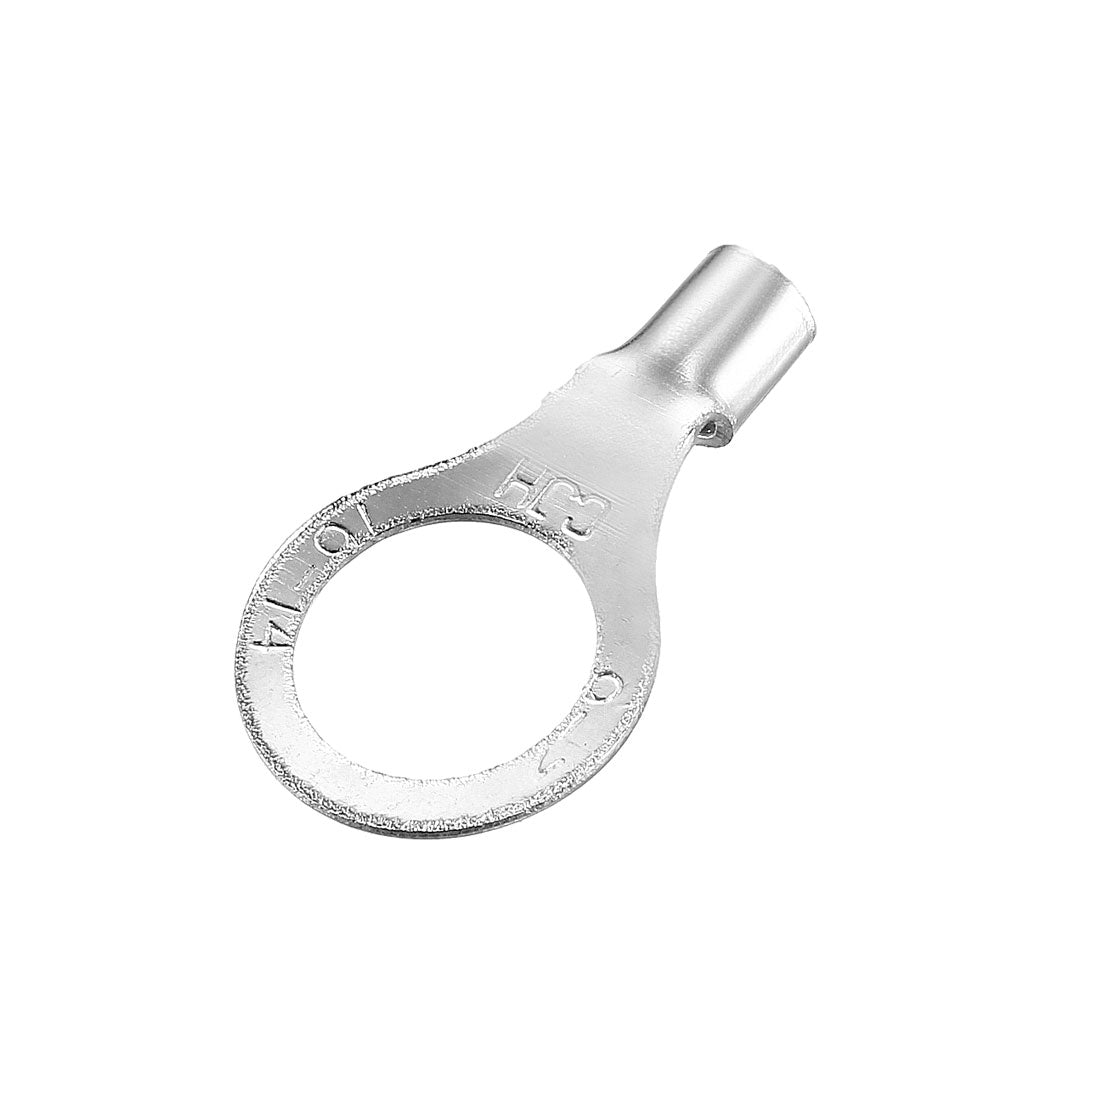 uxcell Uxcell 50Pcs RNB2-8 Non-Insulated U-Type Copper Crimp Terminals 1.5-2.5mm2 Wire Connector Silver Tone